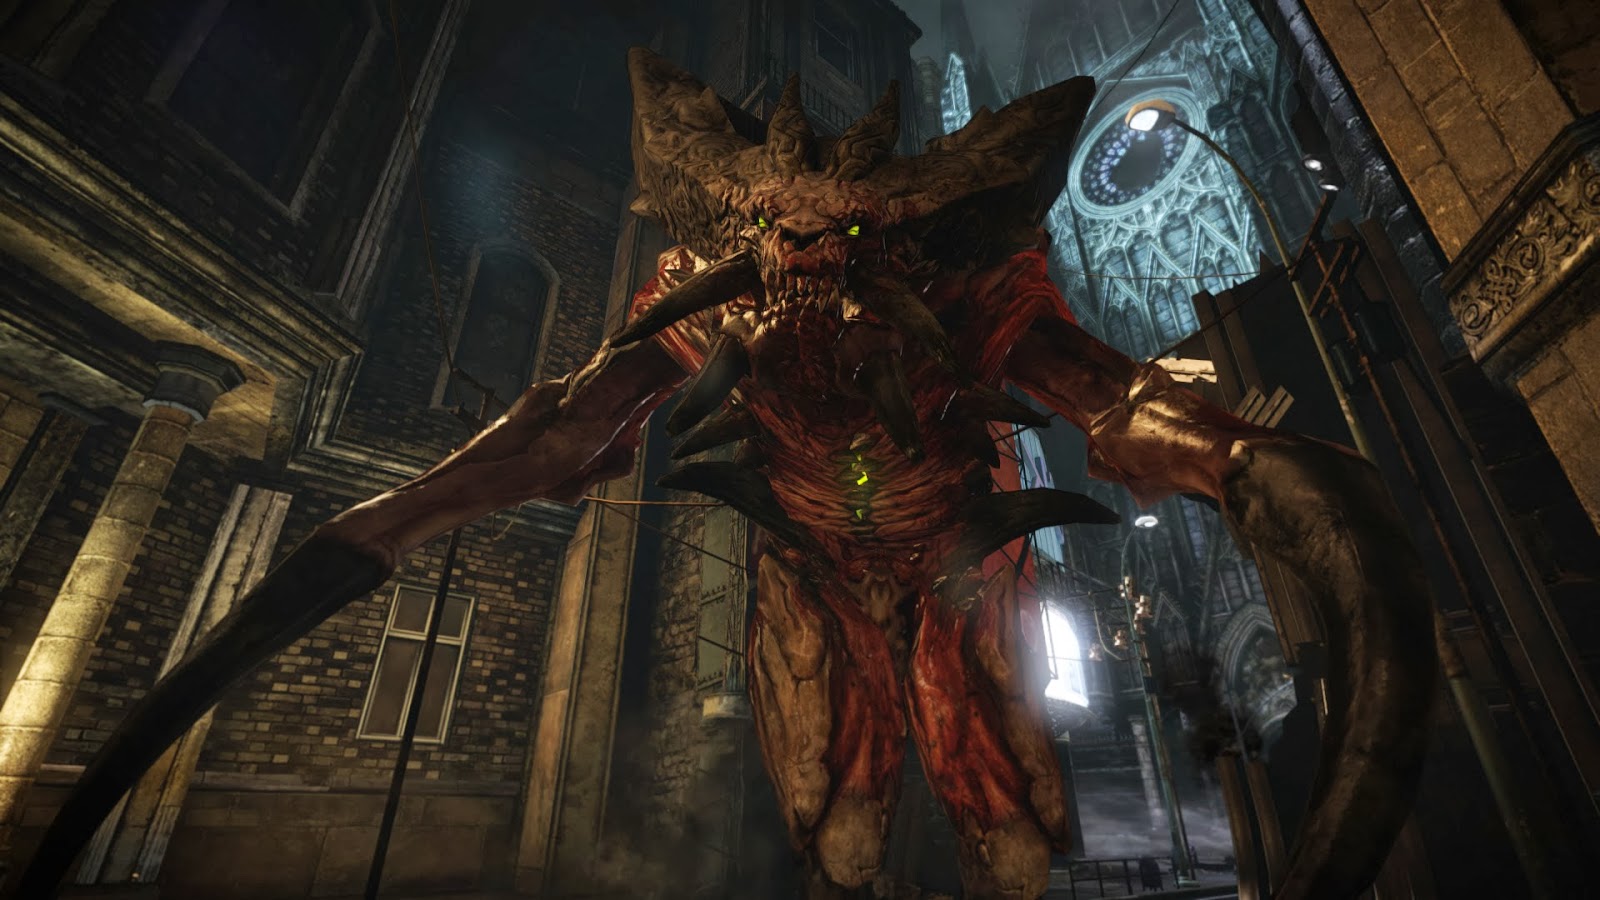 castlevania lords of shadow download